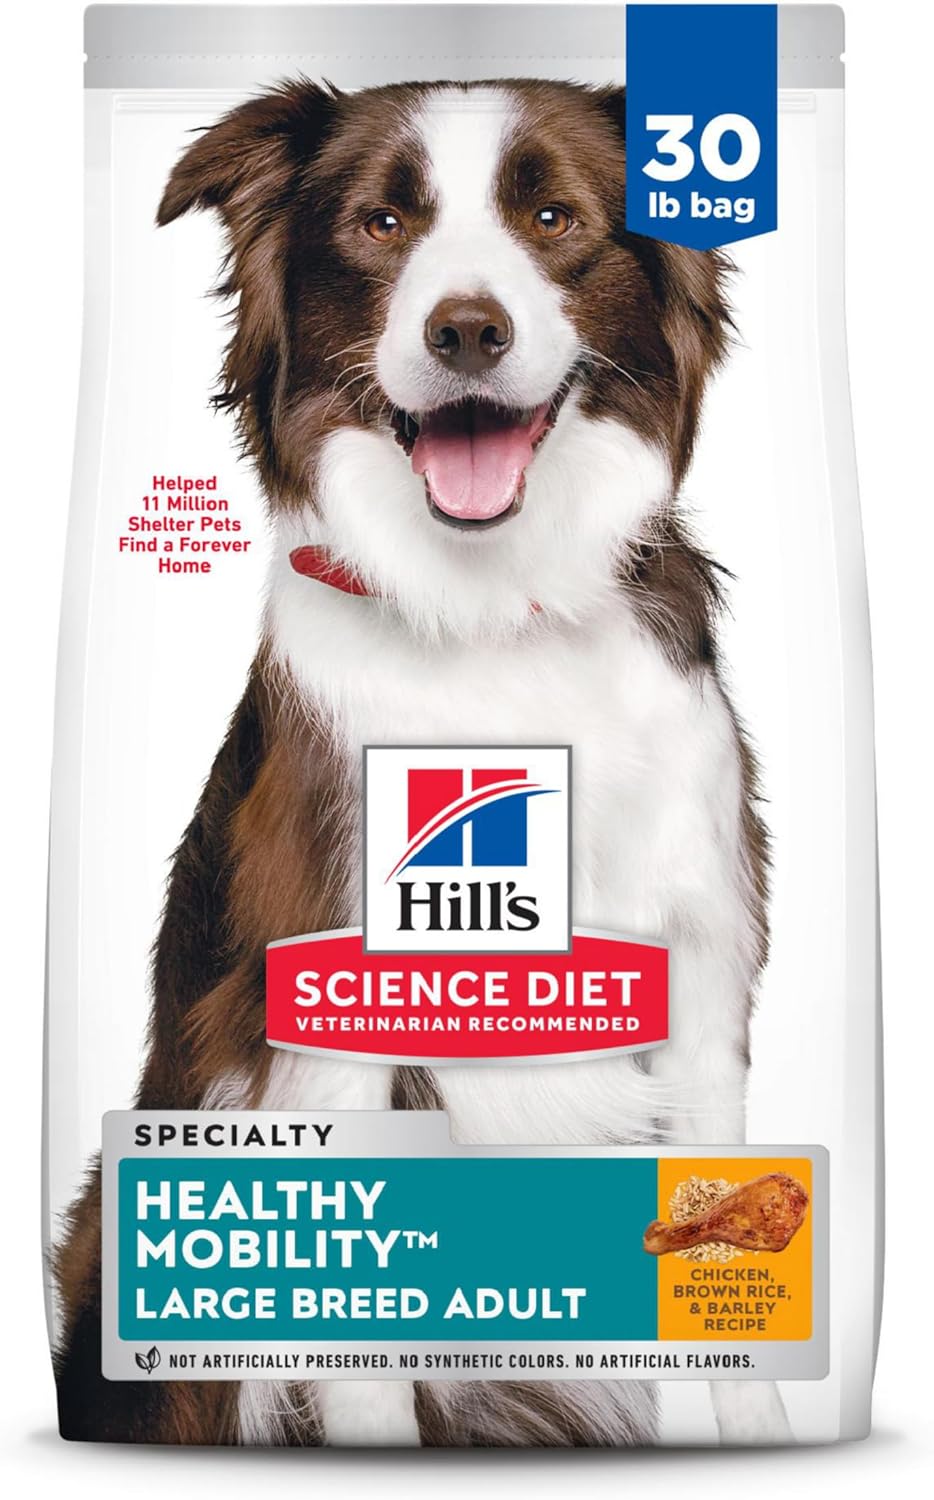 Hill's Science Diet Healthy Mobility, Adult 1-5, Large Breed Mobility Support, Dry Dog Food, Chicken, Brown Rice, & Barley, 30 lb Bag